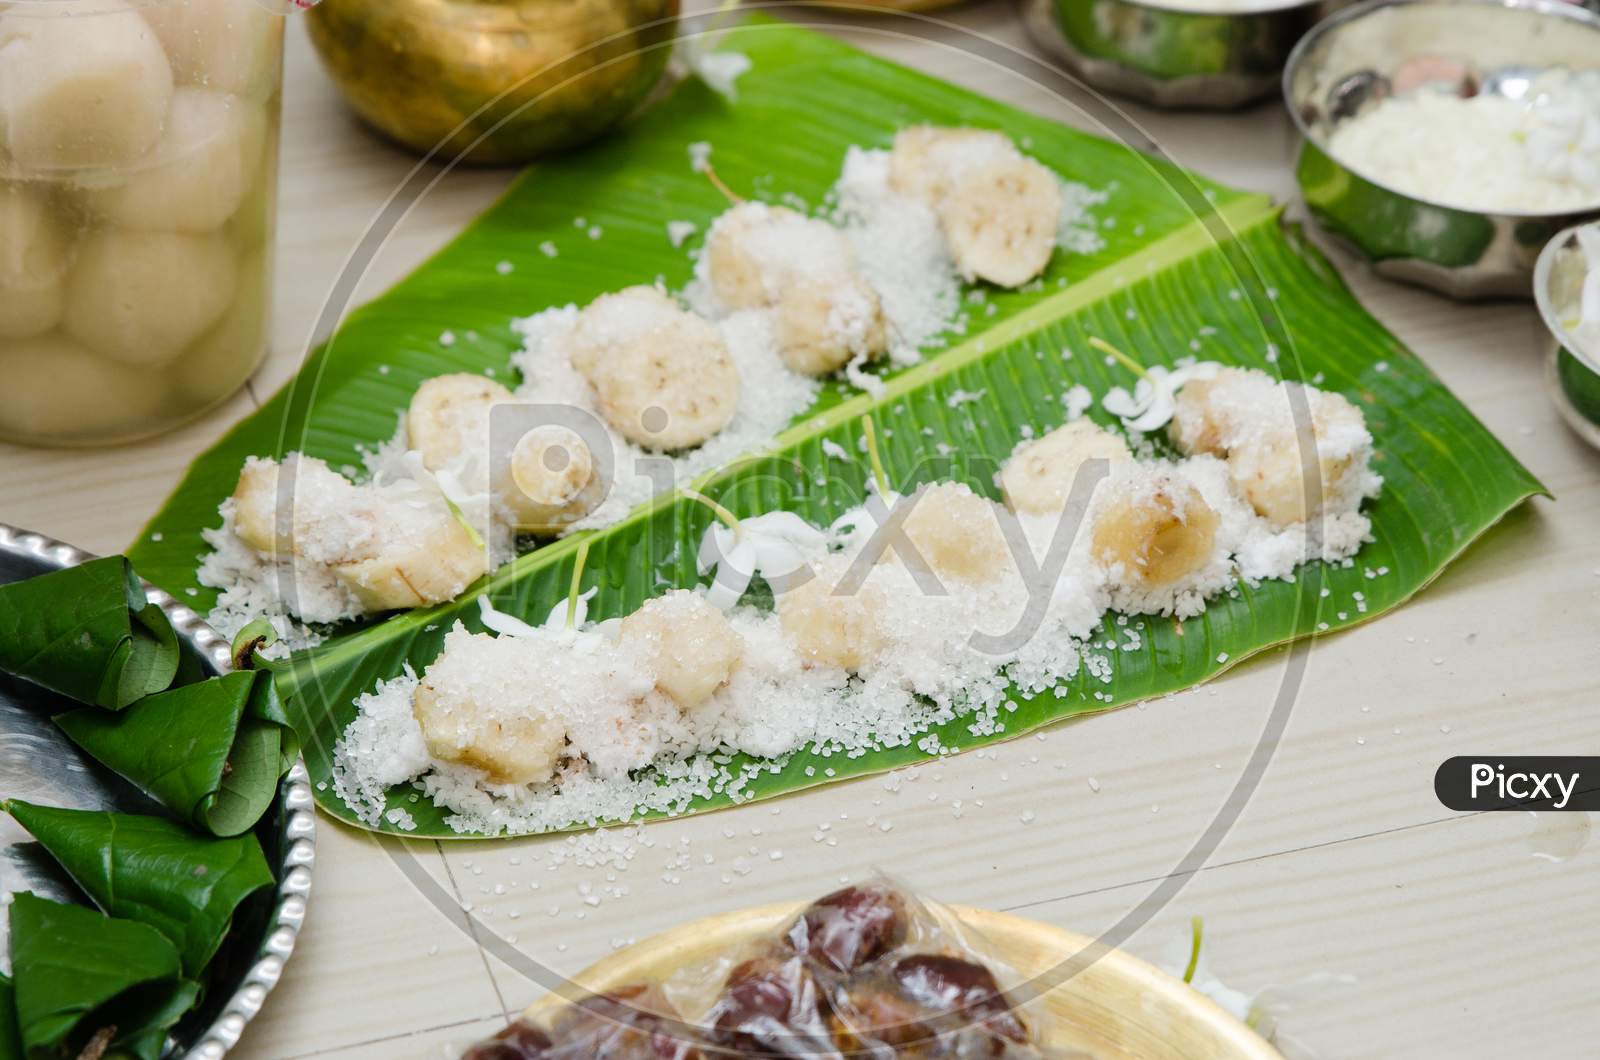 Food material served in banana leaf during a ritual of rice ceremony in India